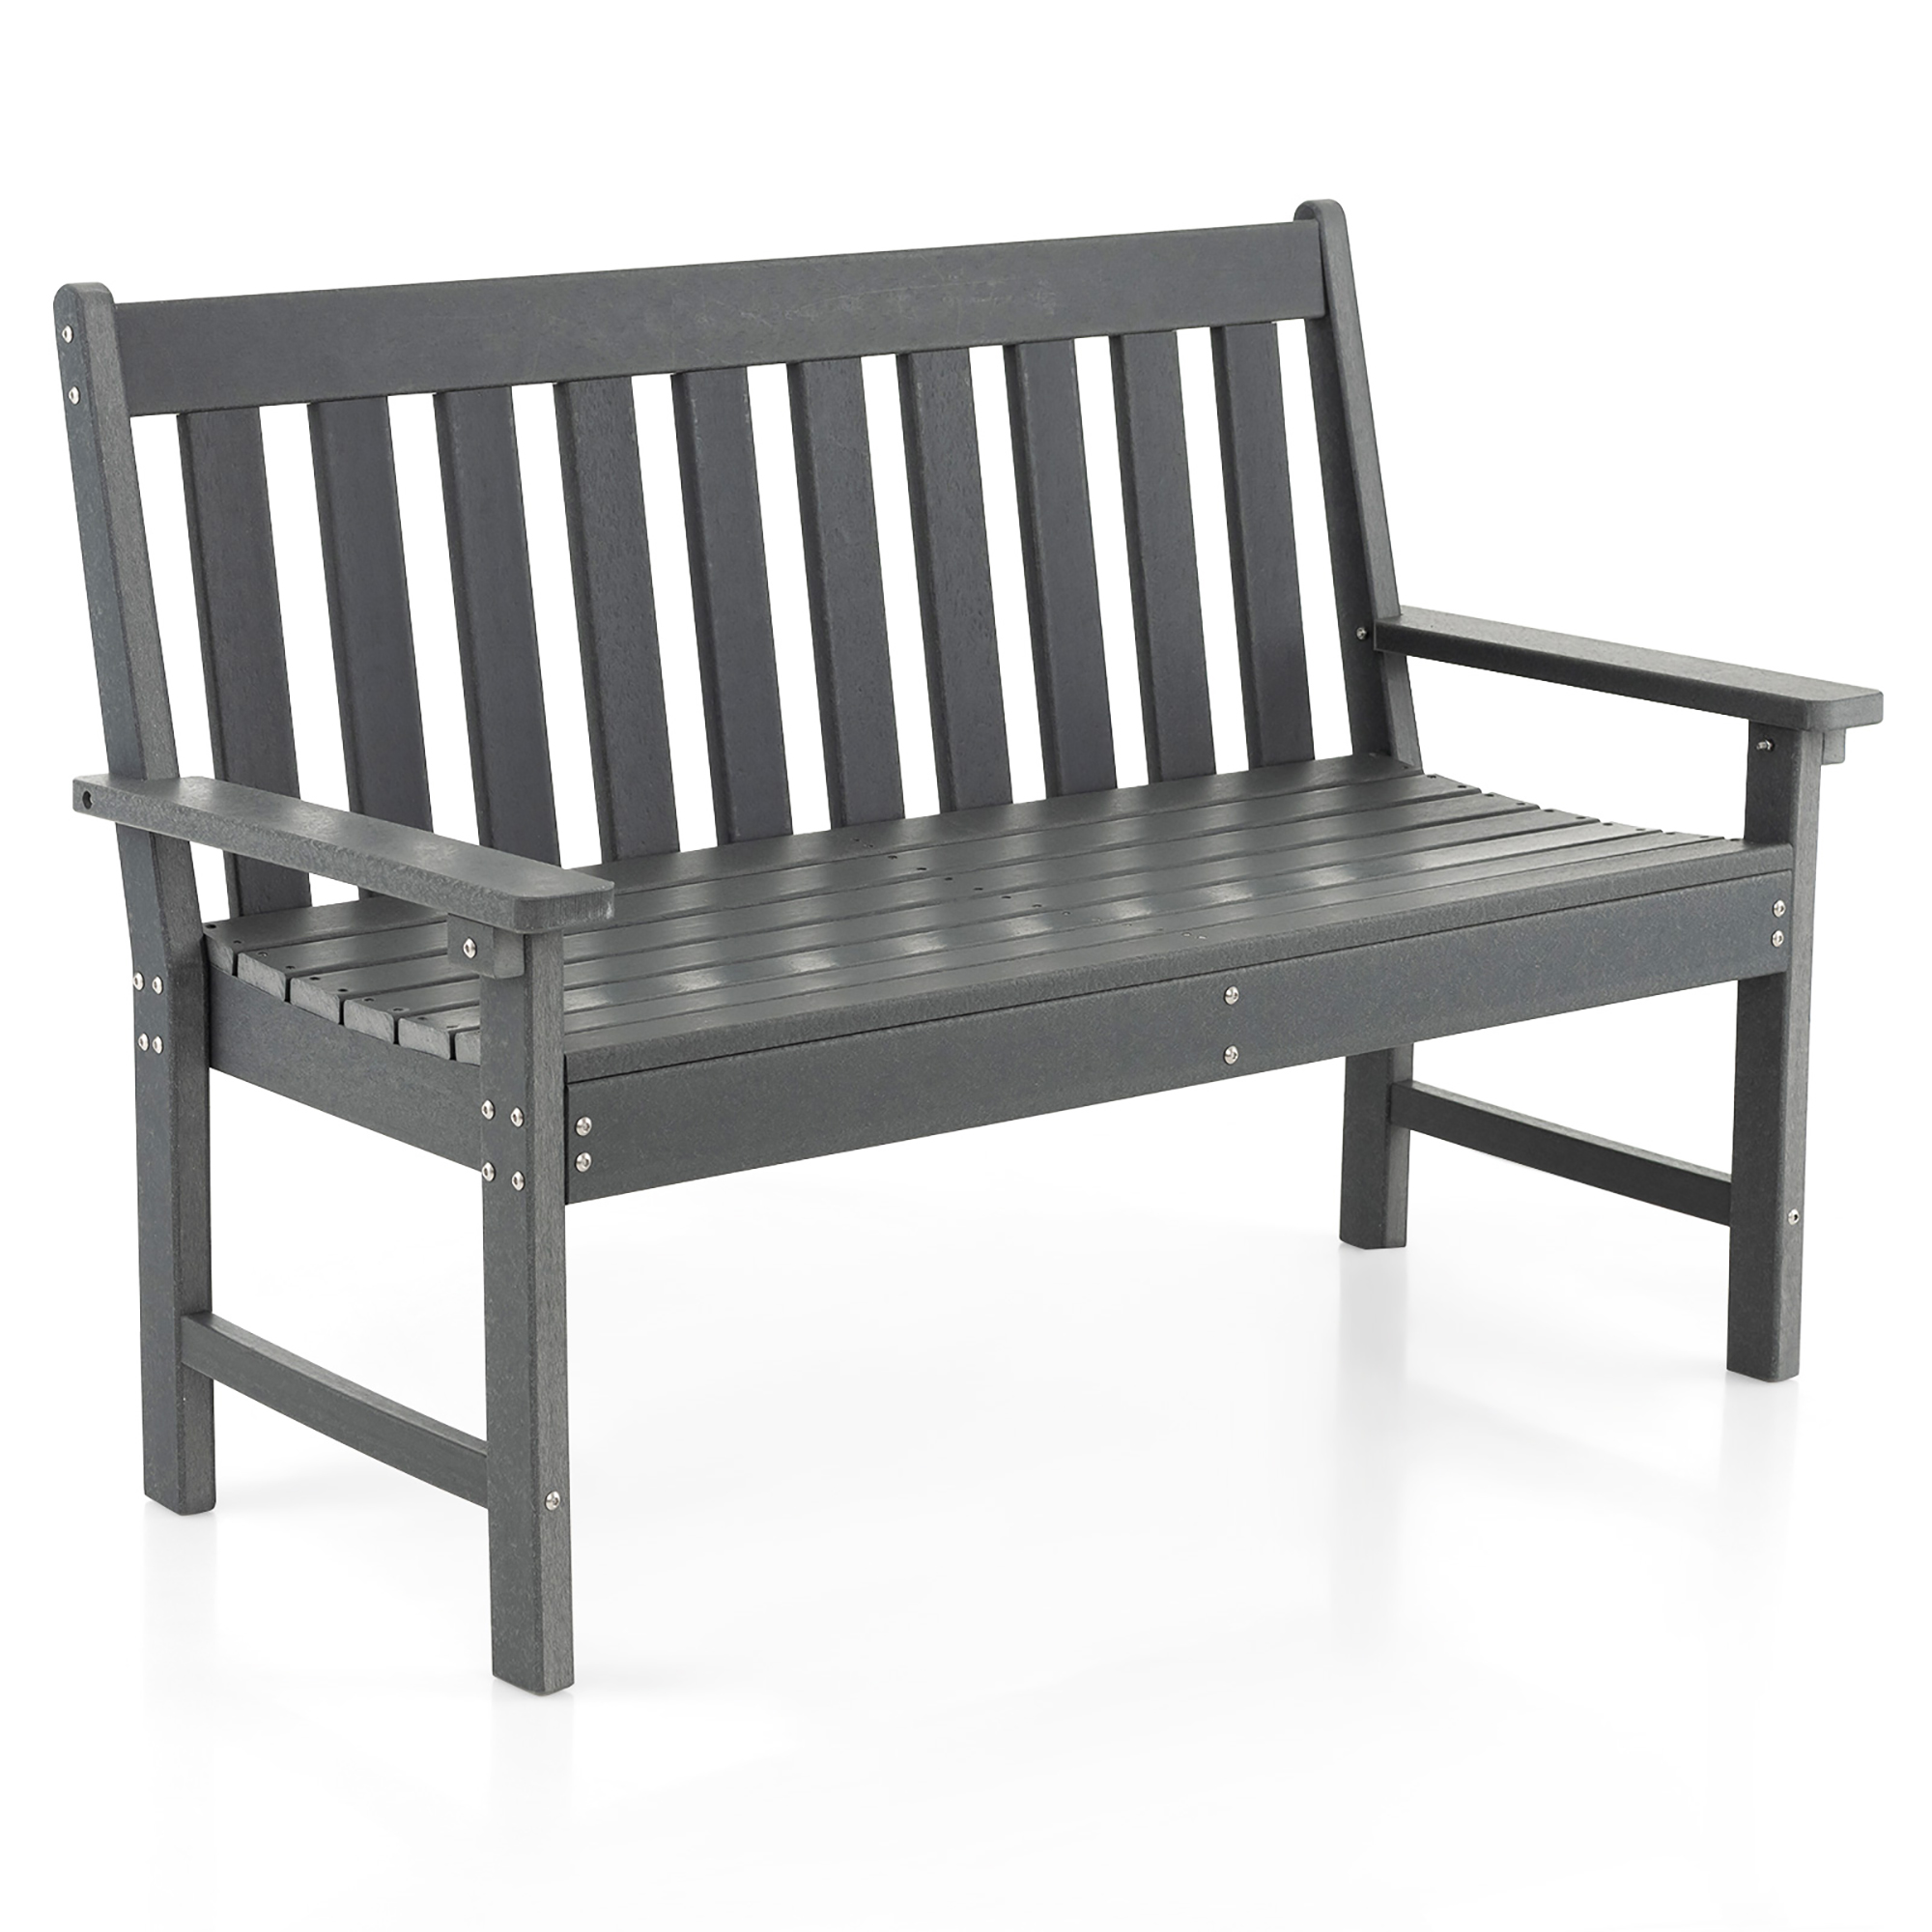 Costway Garden Bench All-Weather HDPE 2-Person Outdoor Bench for Front Porch Backyard